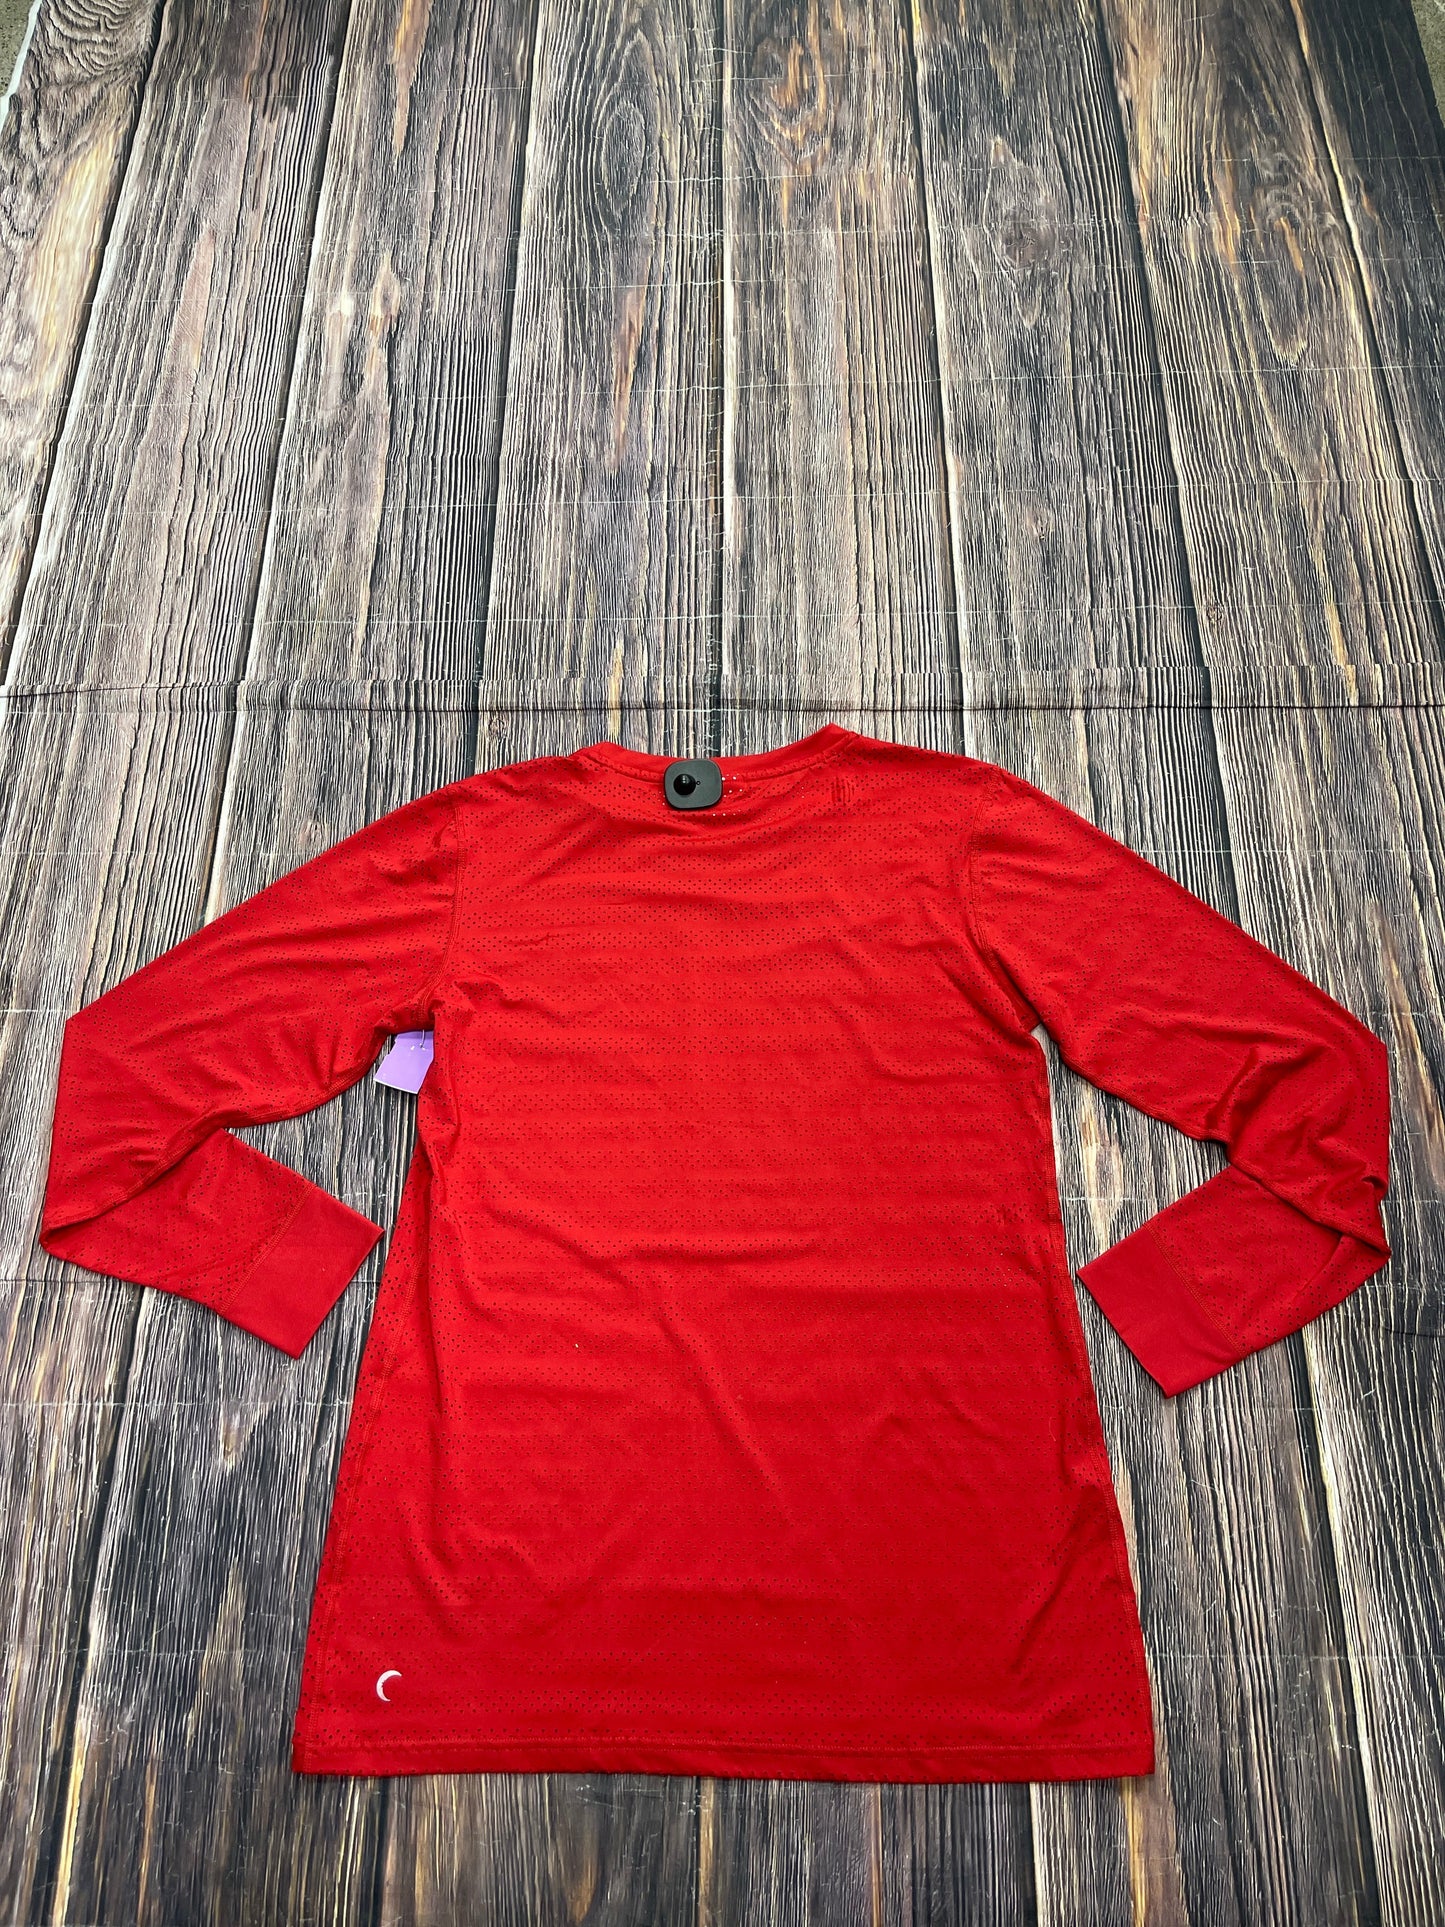 Athletic Top Long Sleeve Collar By Zyia  Size: 1x